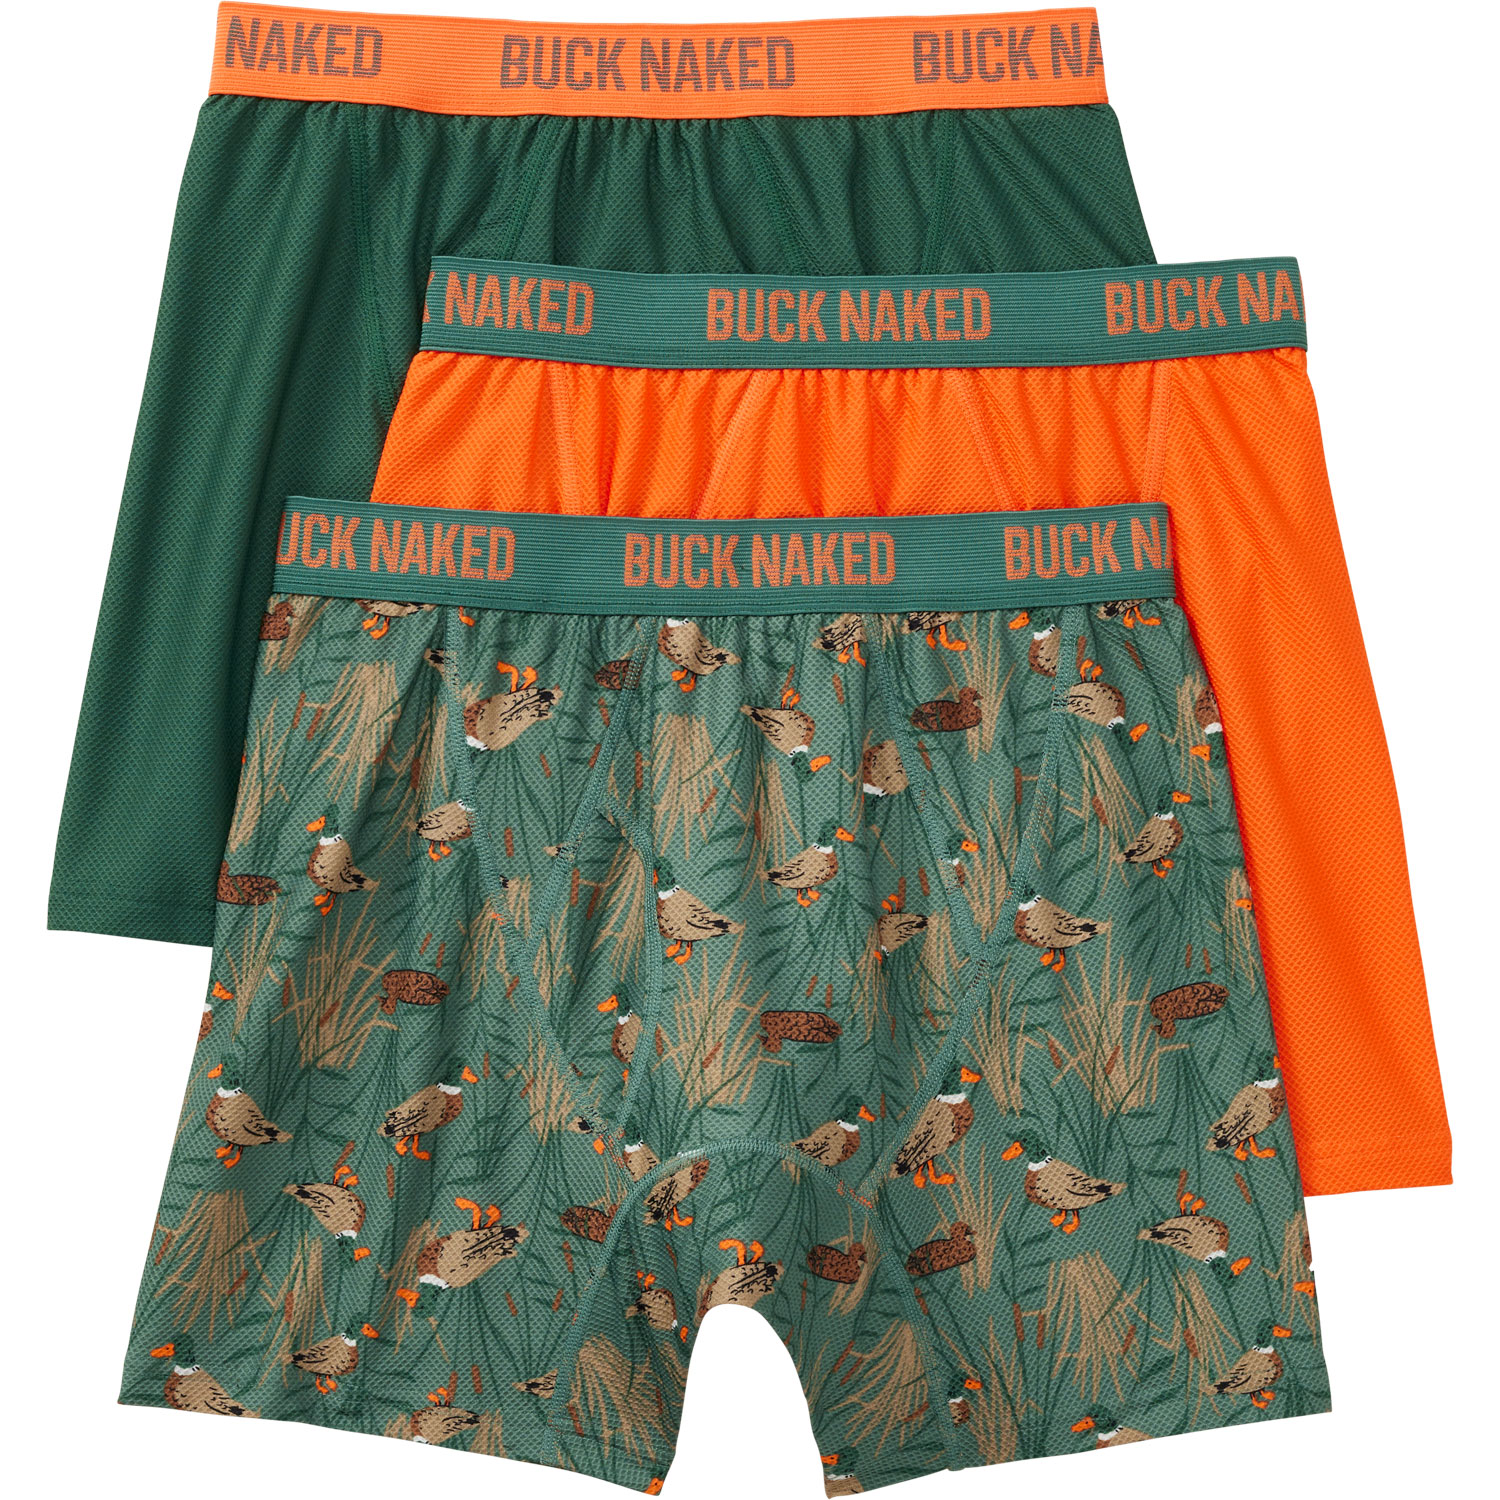 1 Pair Duluth Trading Co Buck Naked Performance Boxer Briefs Alpine Green  76015